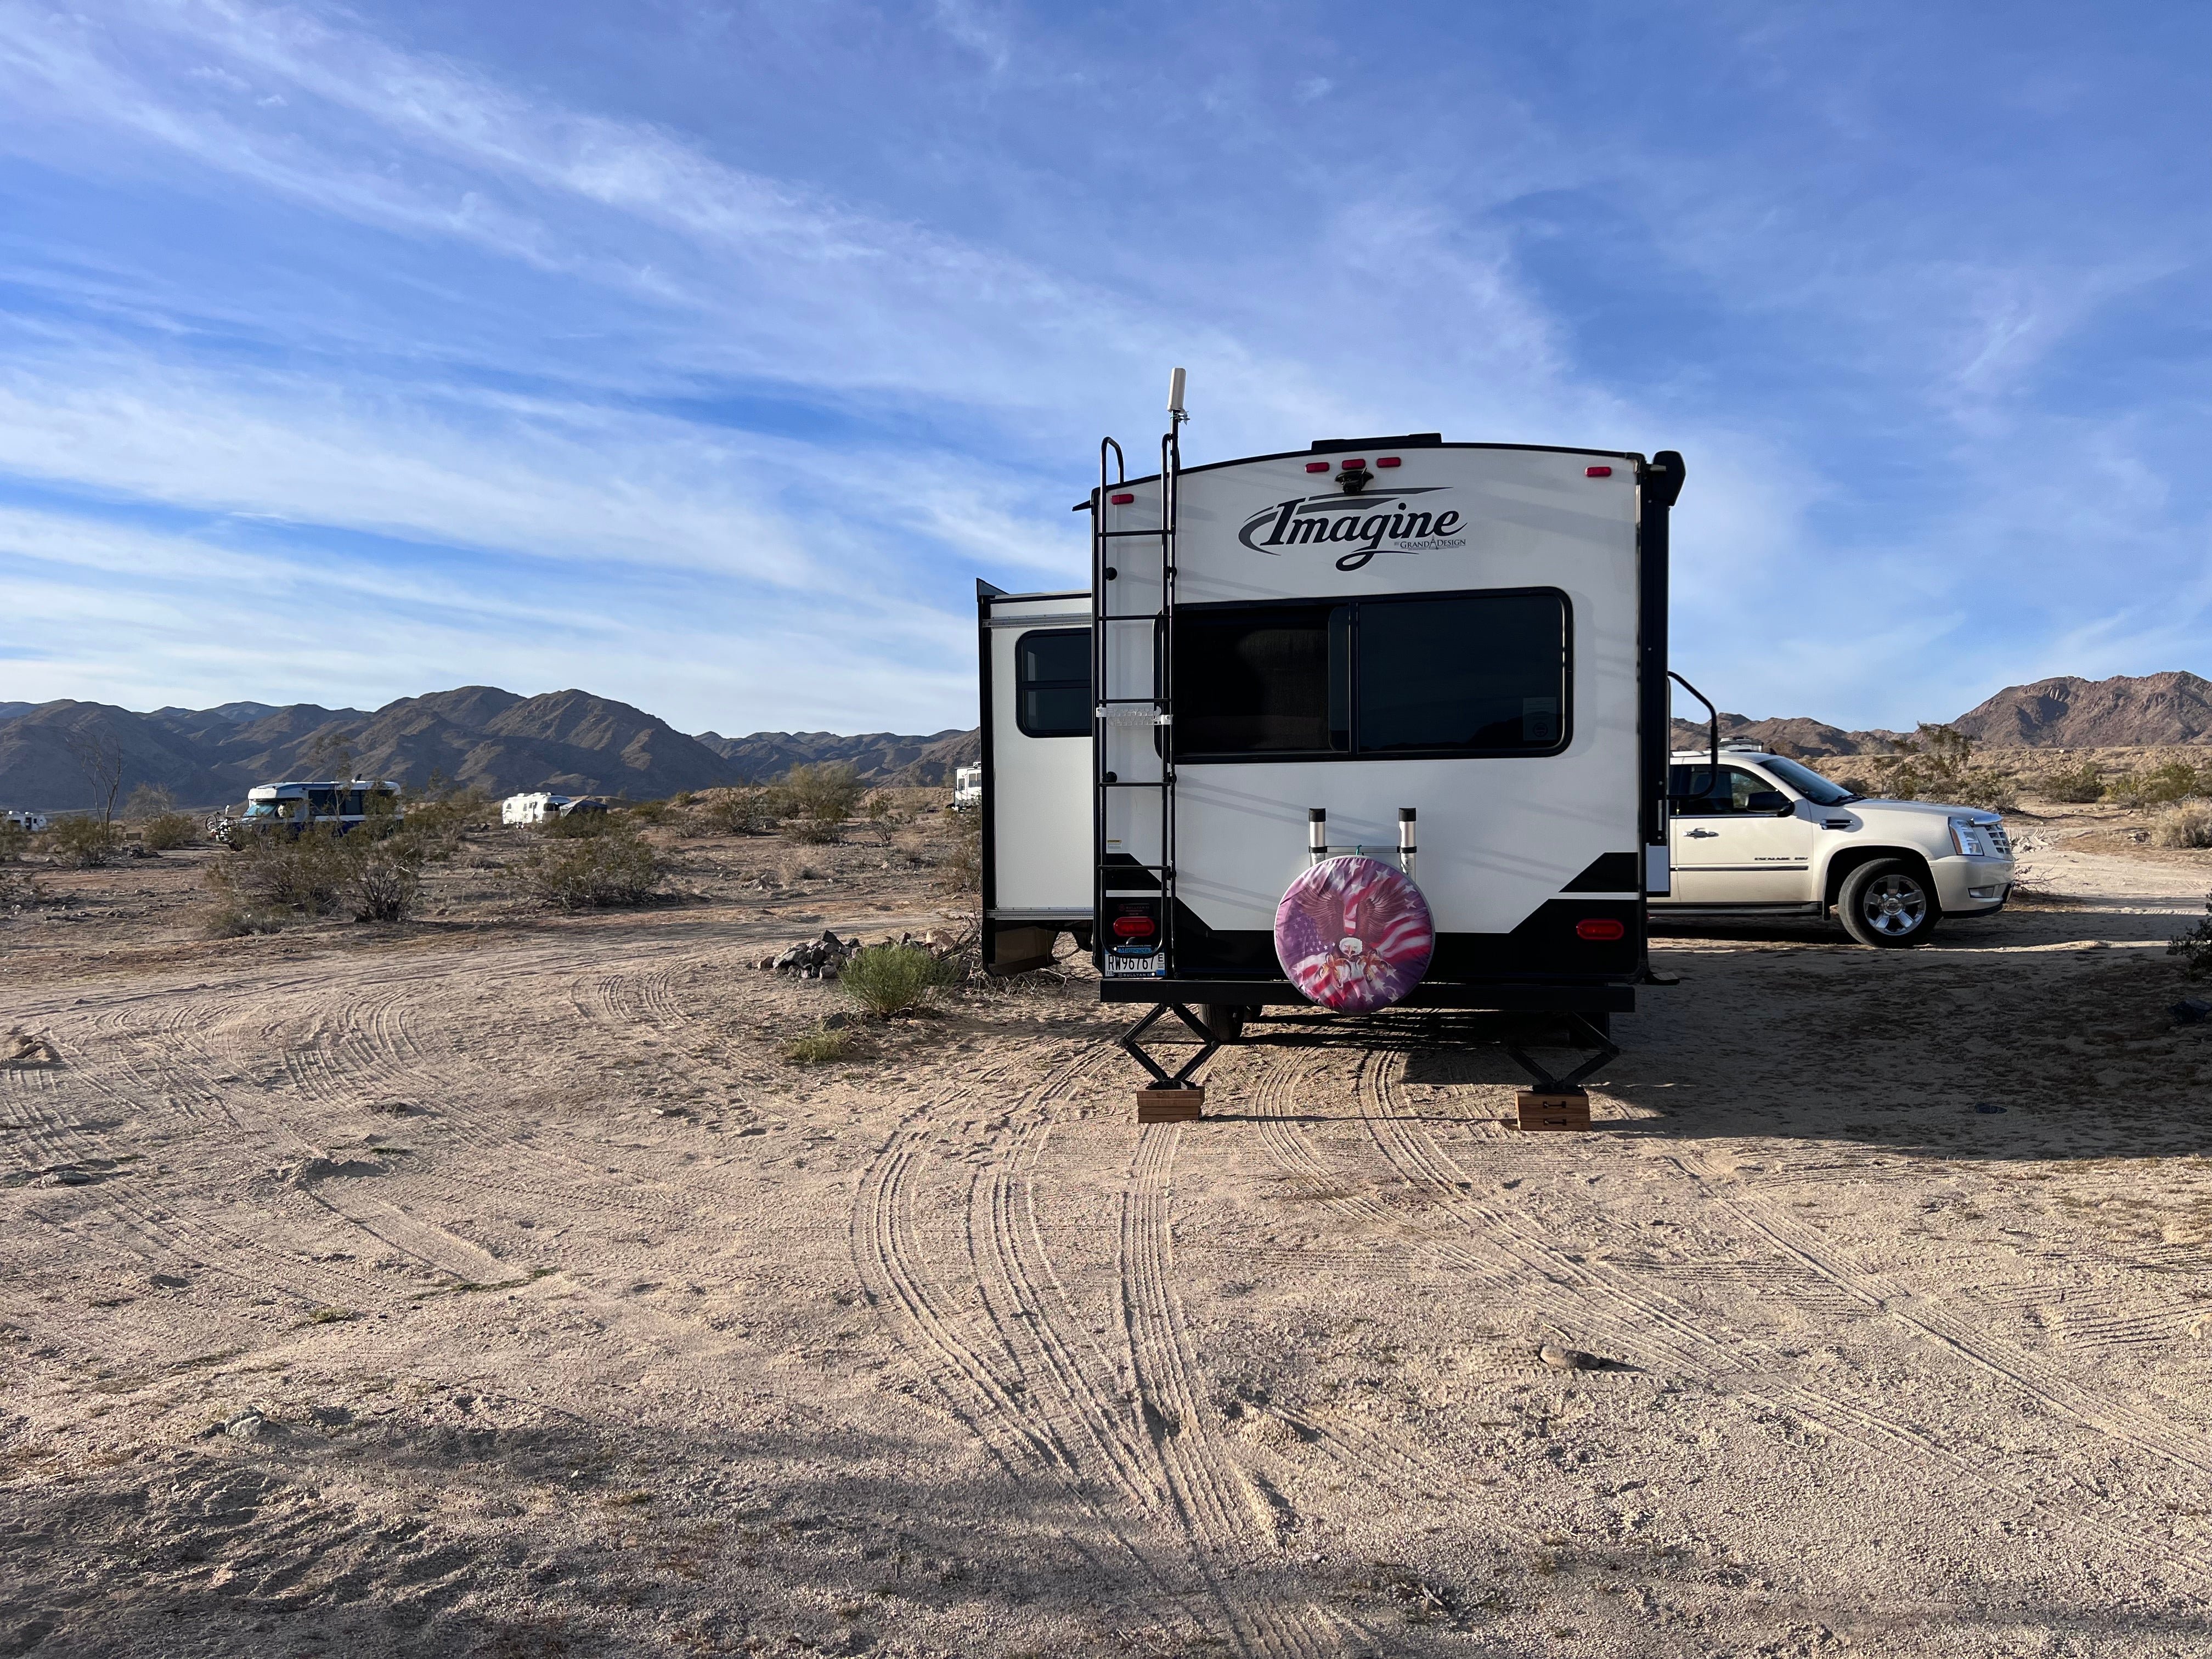 Camper submitted image from Joshua Tree South Dispersed Camping - 1